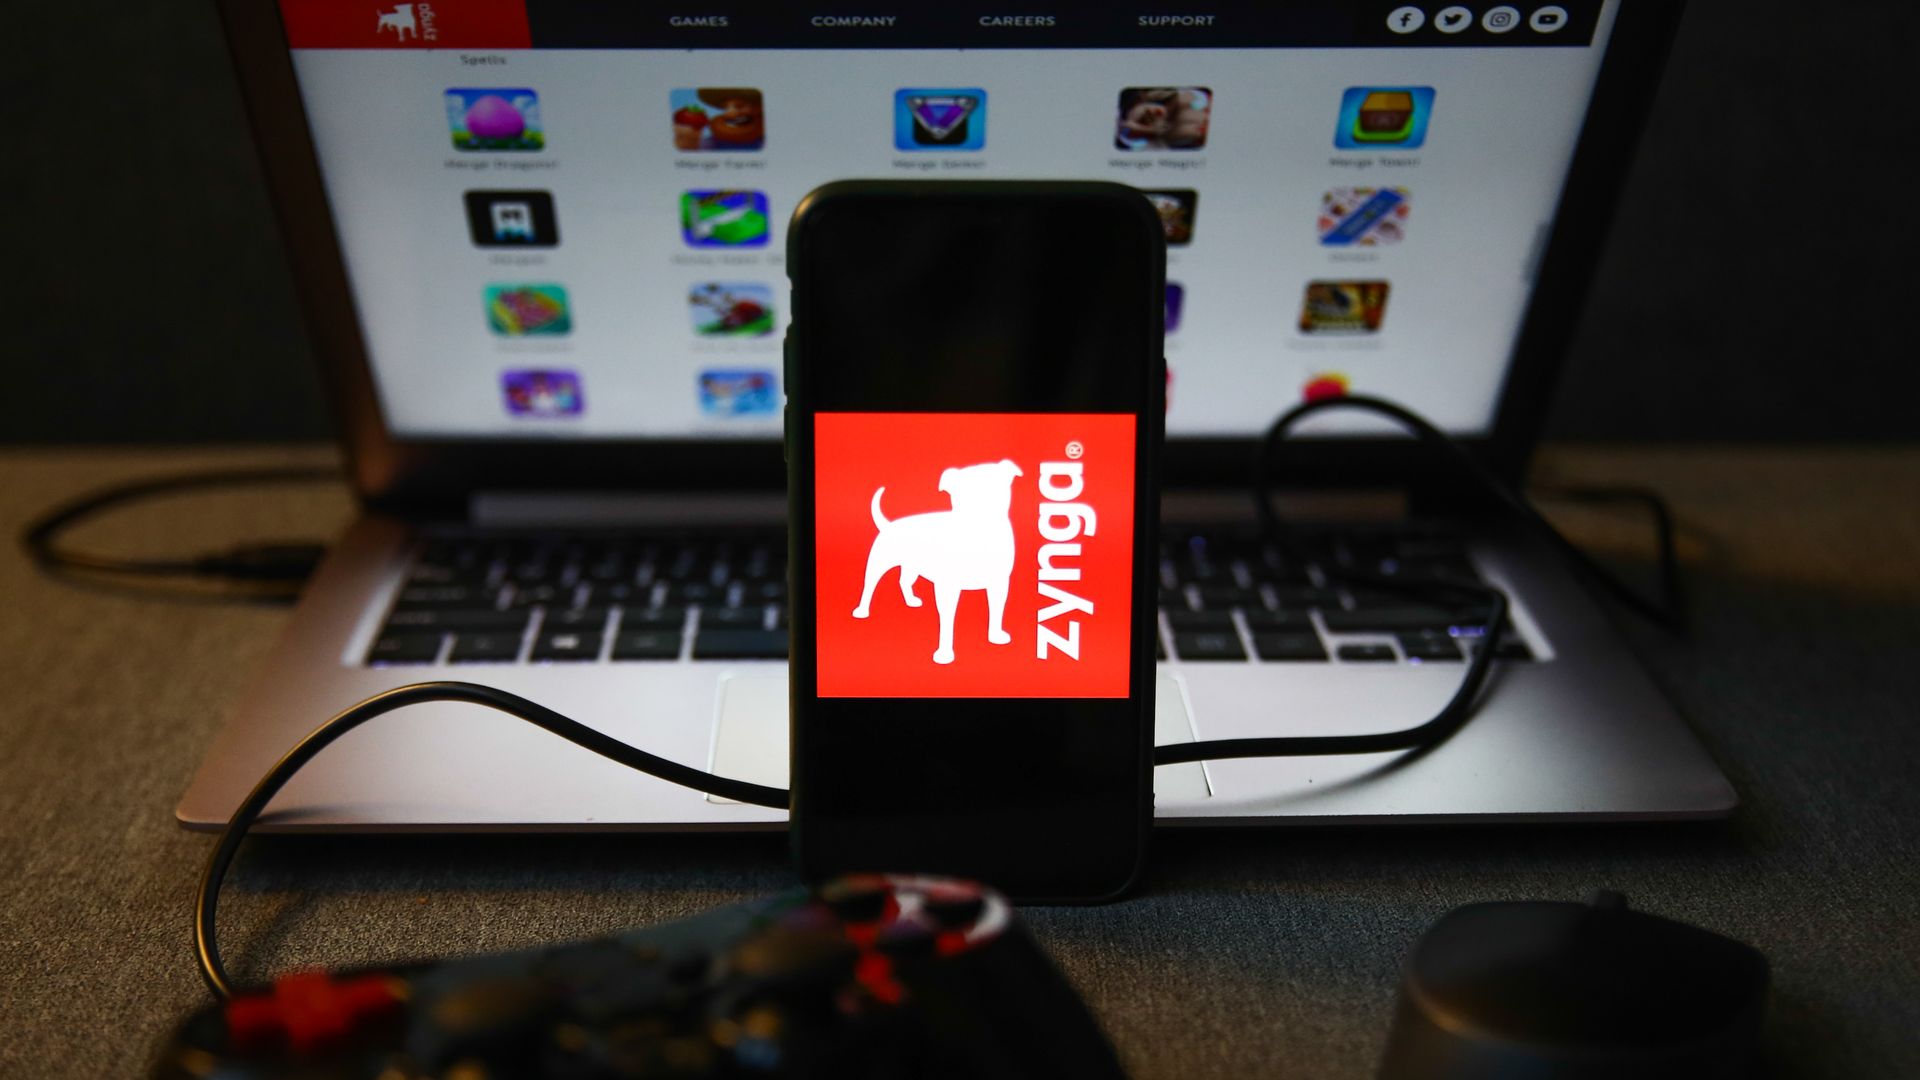 Picture of a phone with the Zynga logo